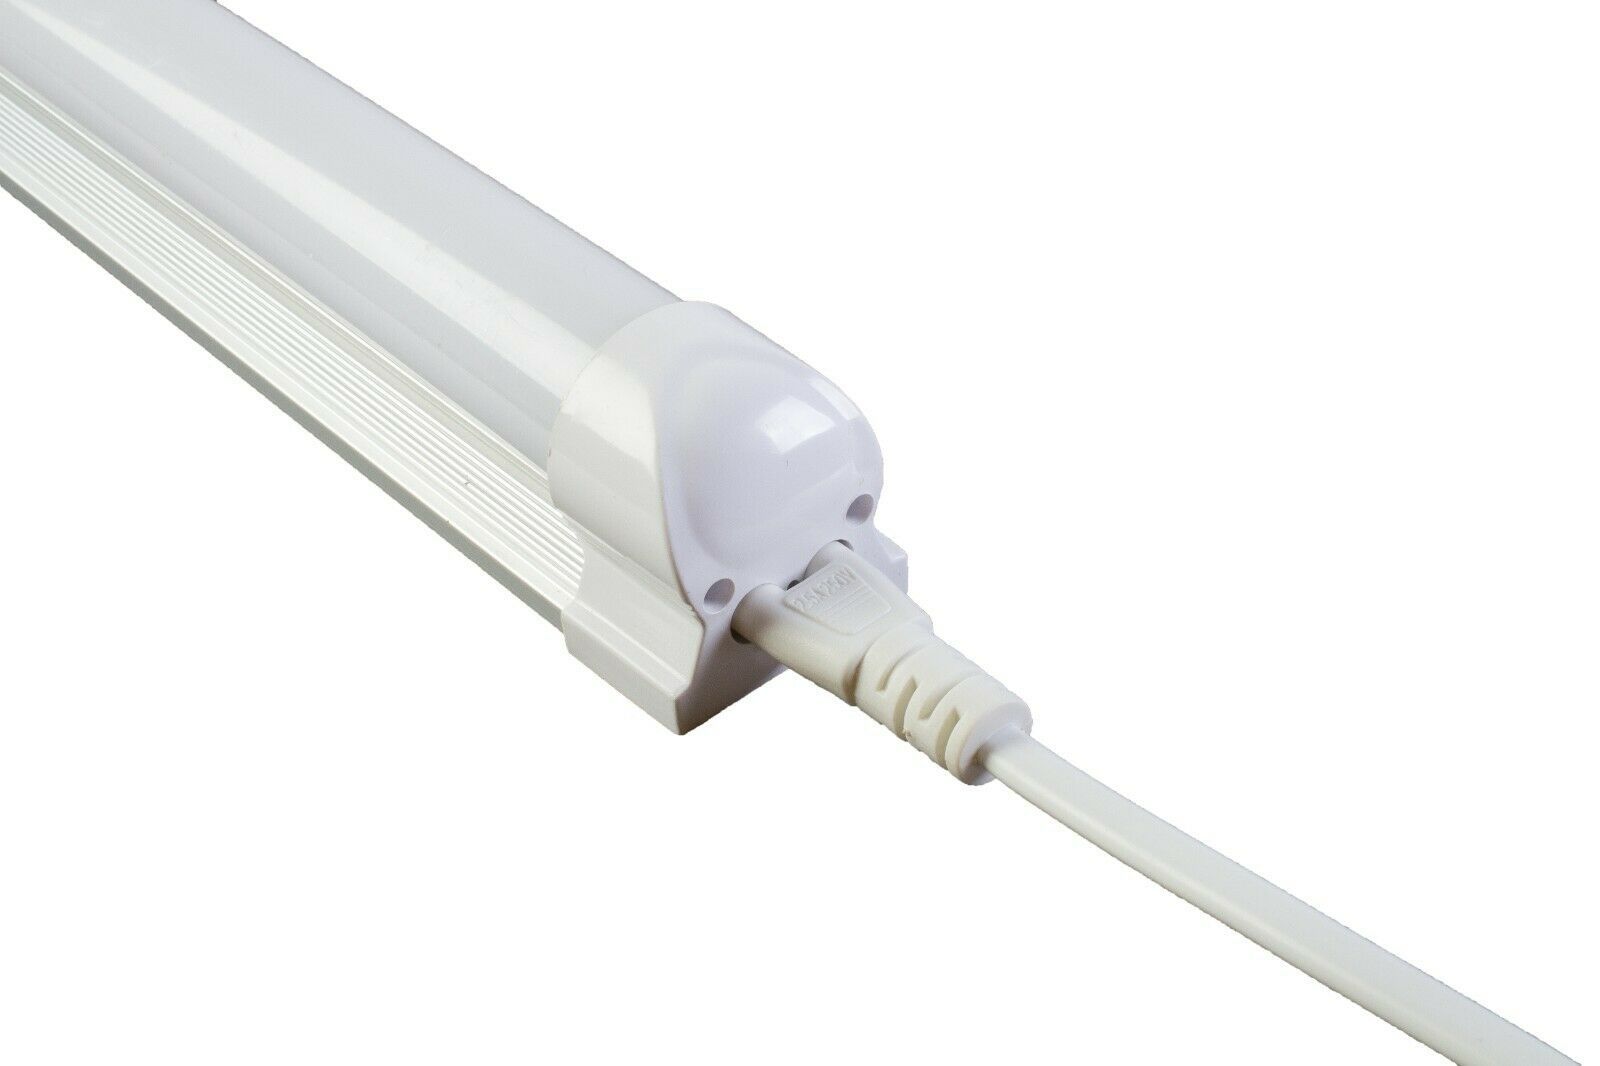 10ft Integrated LED Tube Power Wire Cable with On/Off Switch 3 Prong UL Listed